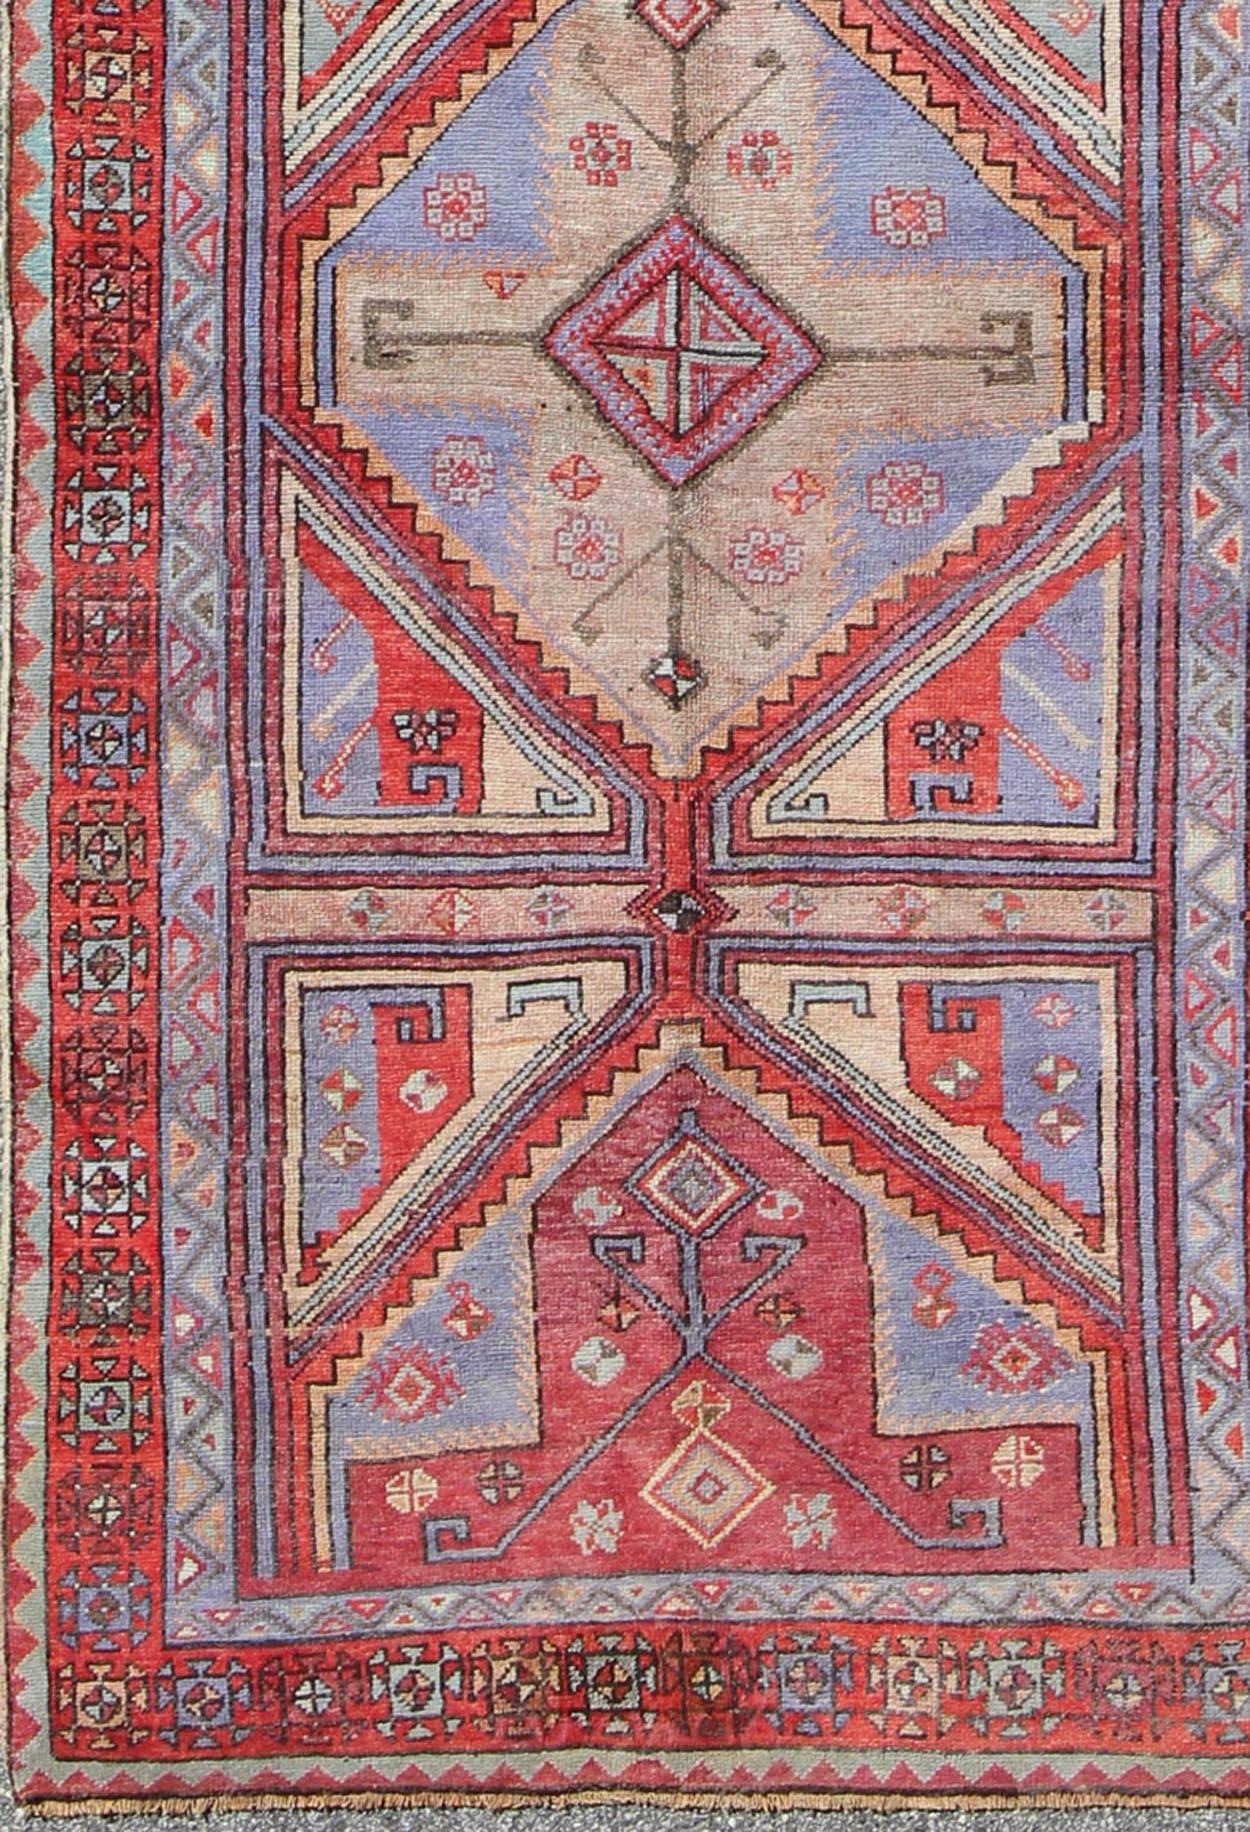 Vivid and Colorful Oushak Runner with Repeating Diamond Medallions  rug-tu-ugu-136008  origin/turkey

This Turkish Oushak runner features a repeating medallion design. Colors include bright and soft red, mint green, taupe, and light purple. Turkish